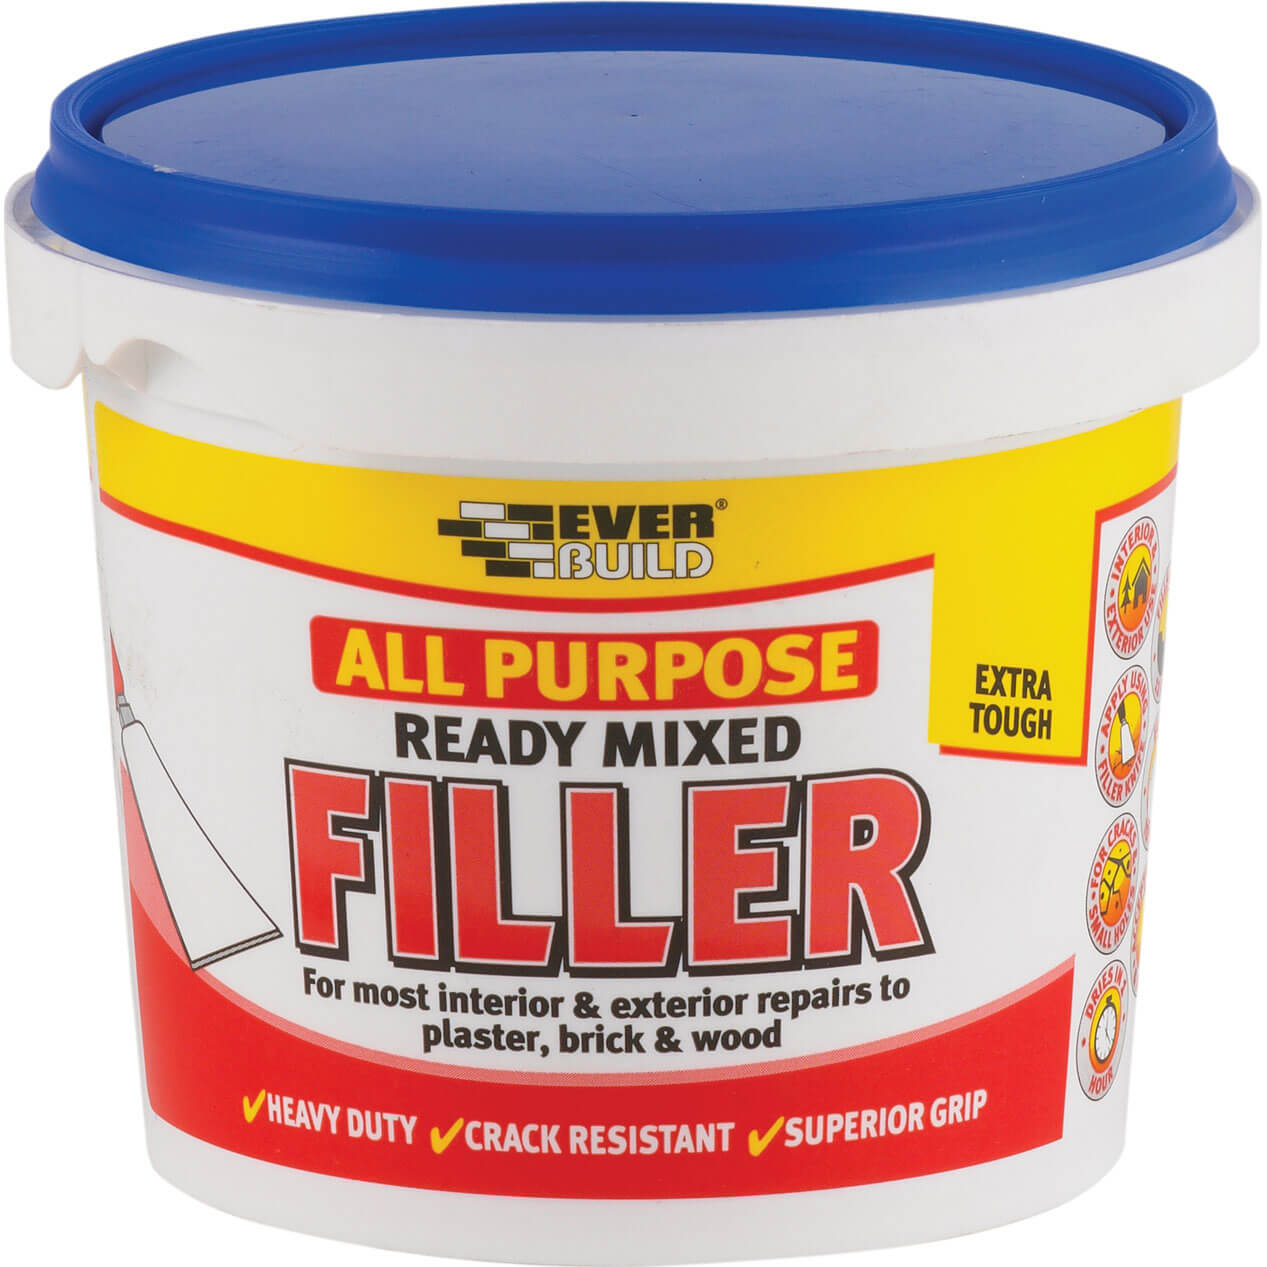 Photo of Everbuild All Purpose Ready Mixed Filler 600g